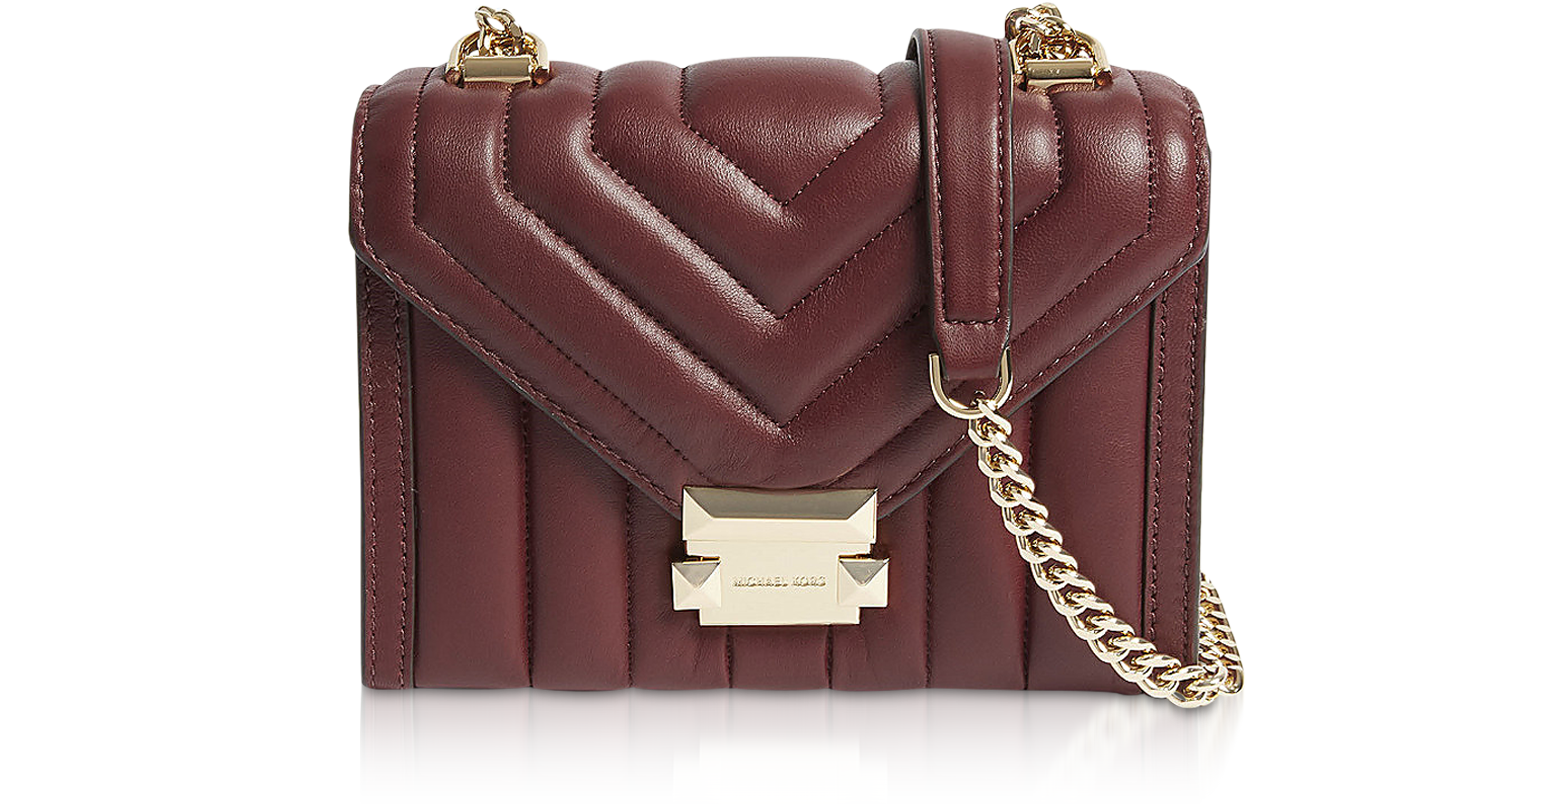 whitney small quilted leather convertible shoulder bag